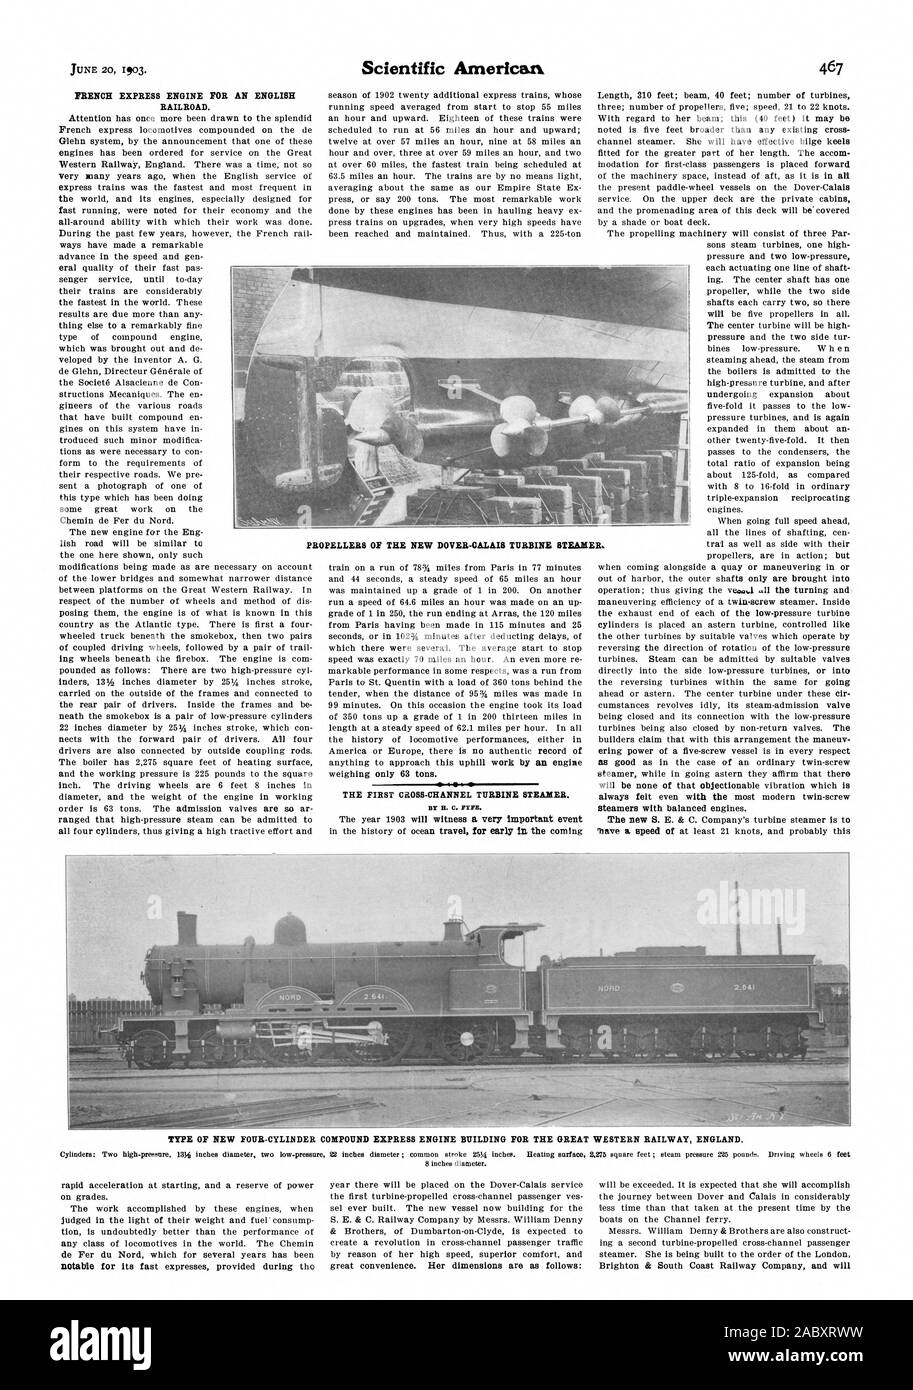 BY H. C. FYITE. Steamers with balanced engines. PROPELLERS OF THE NEW DOVER-CALAIS TURBINE STEAMER. TYPE OF NEW FOUR-CYLINDER COMPOUND EXPRESS ENGINE BUILDING FOR THE GREAT WESTERN RAILWAY ENGLAND., scientific american, 1903-06-20 Stock Photo